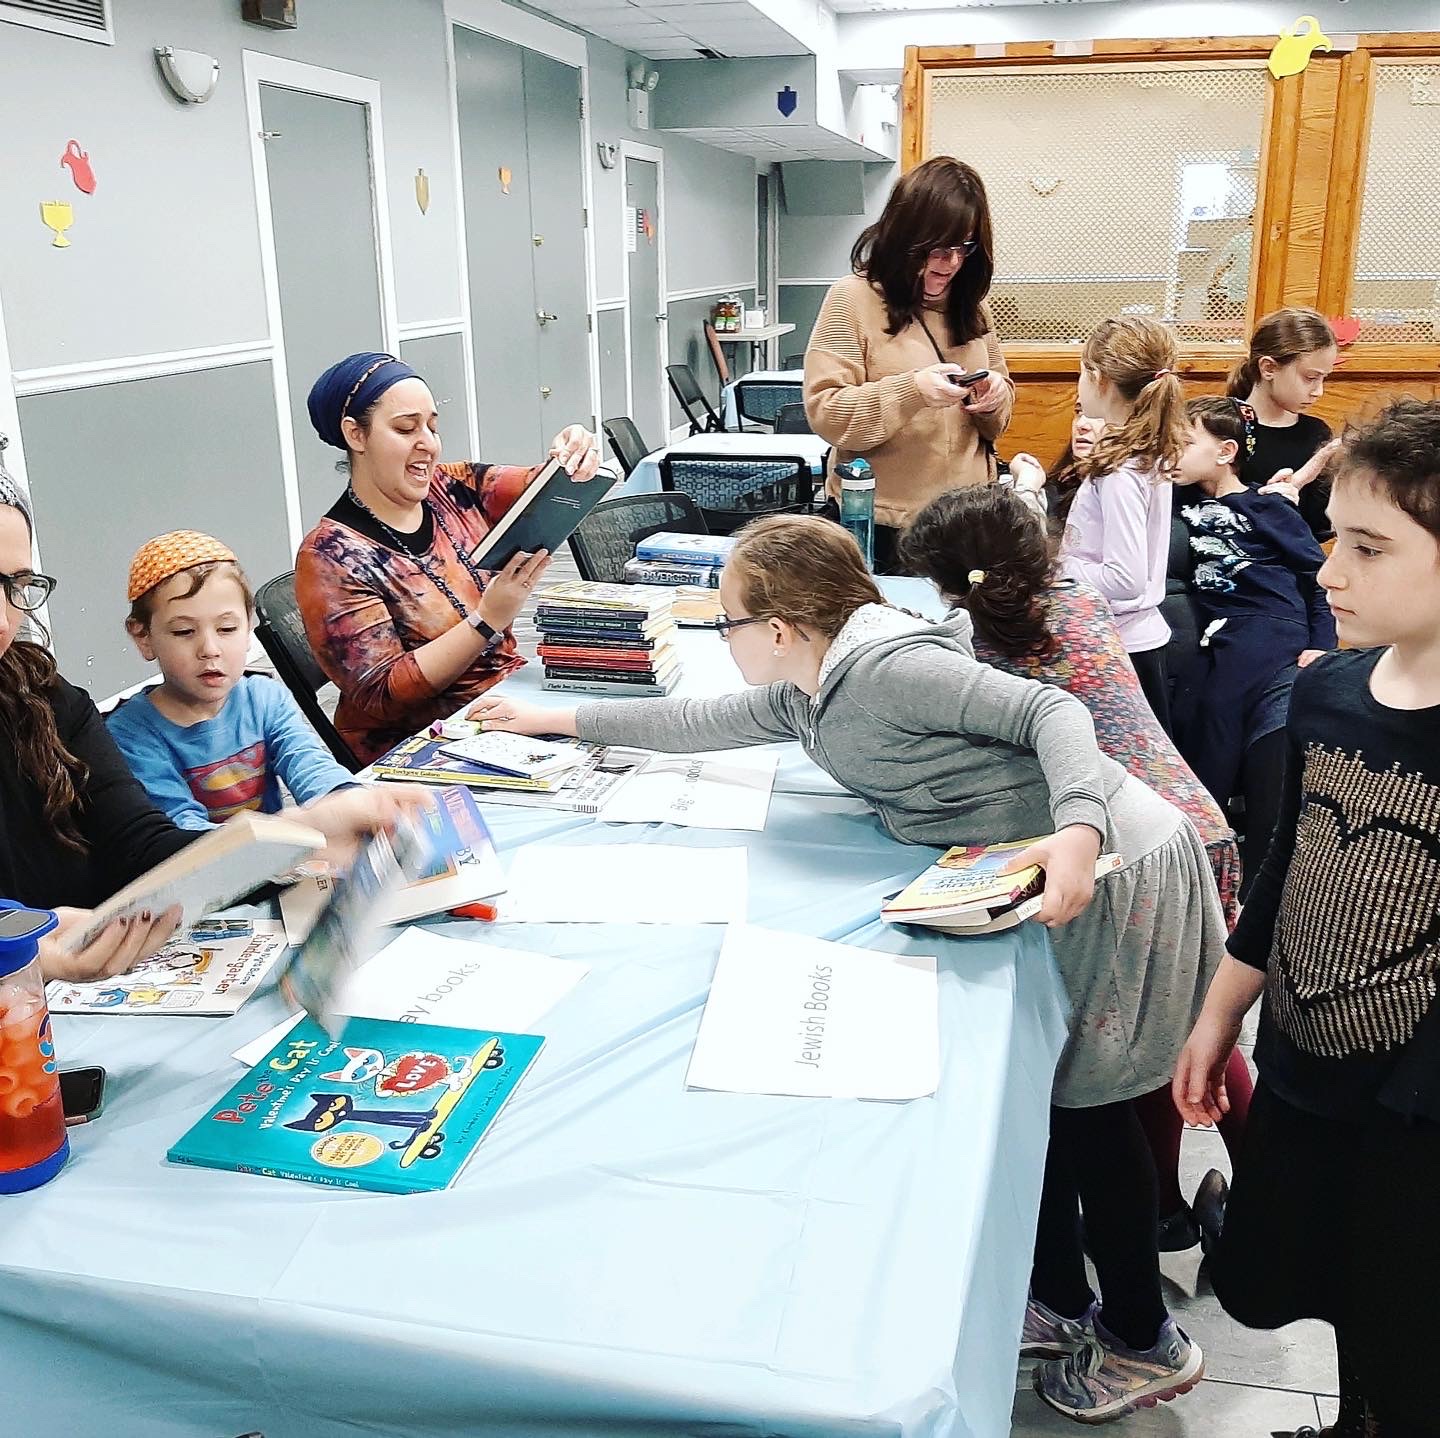 Volunteers from The Young Israel of Queens Valley synagogue organize